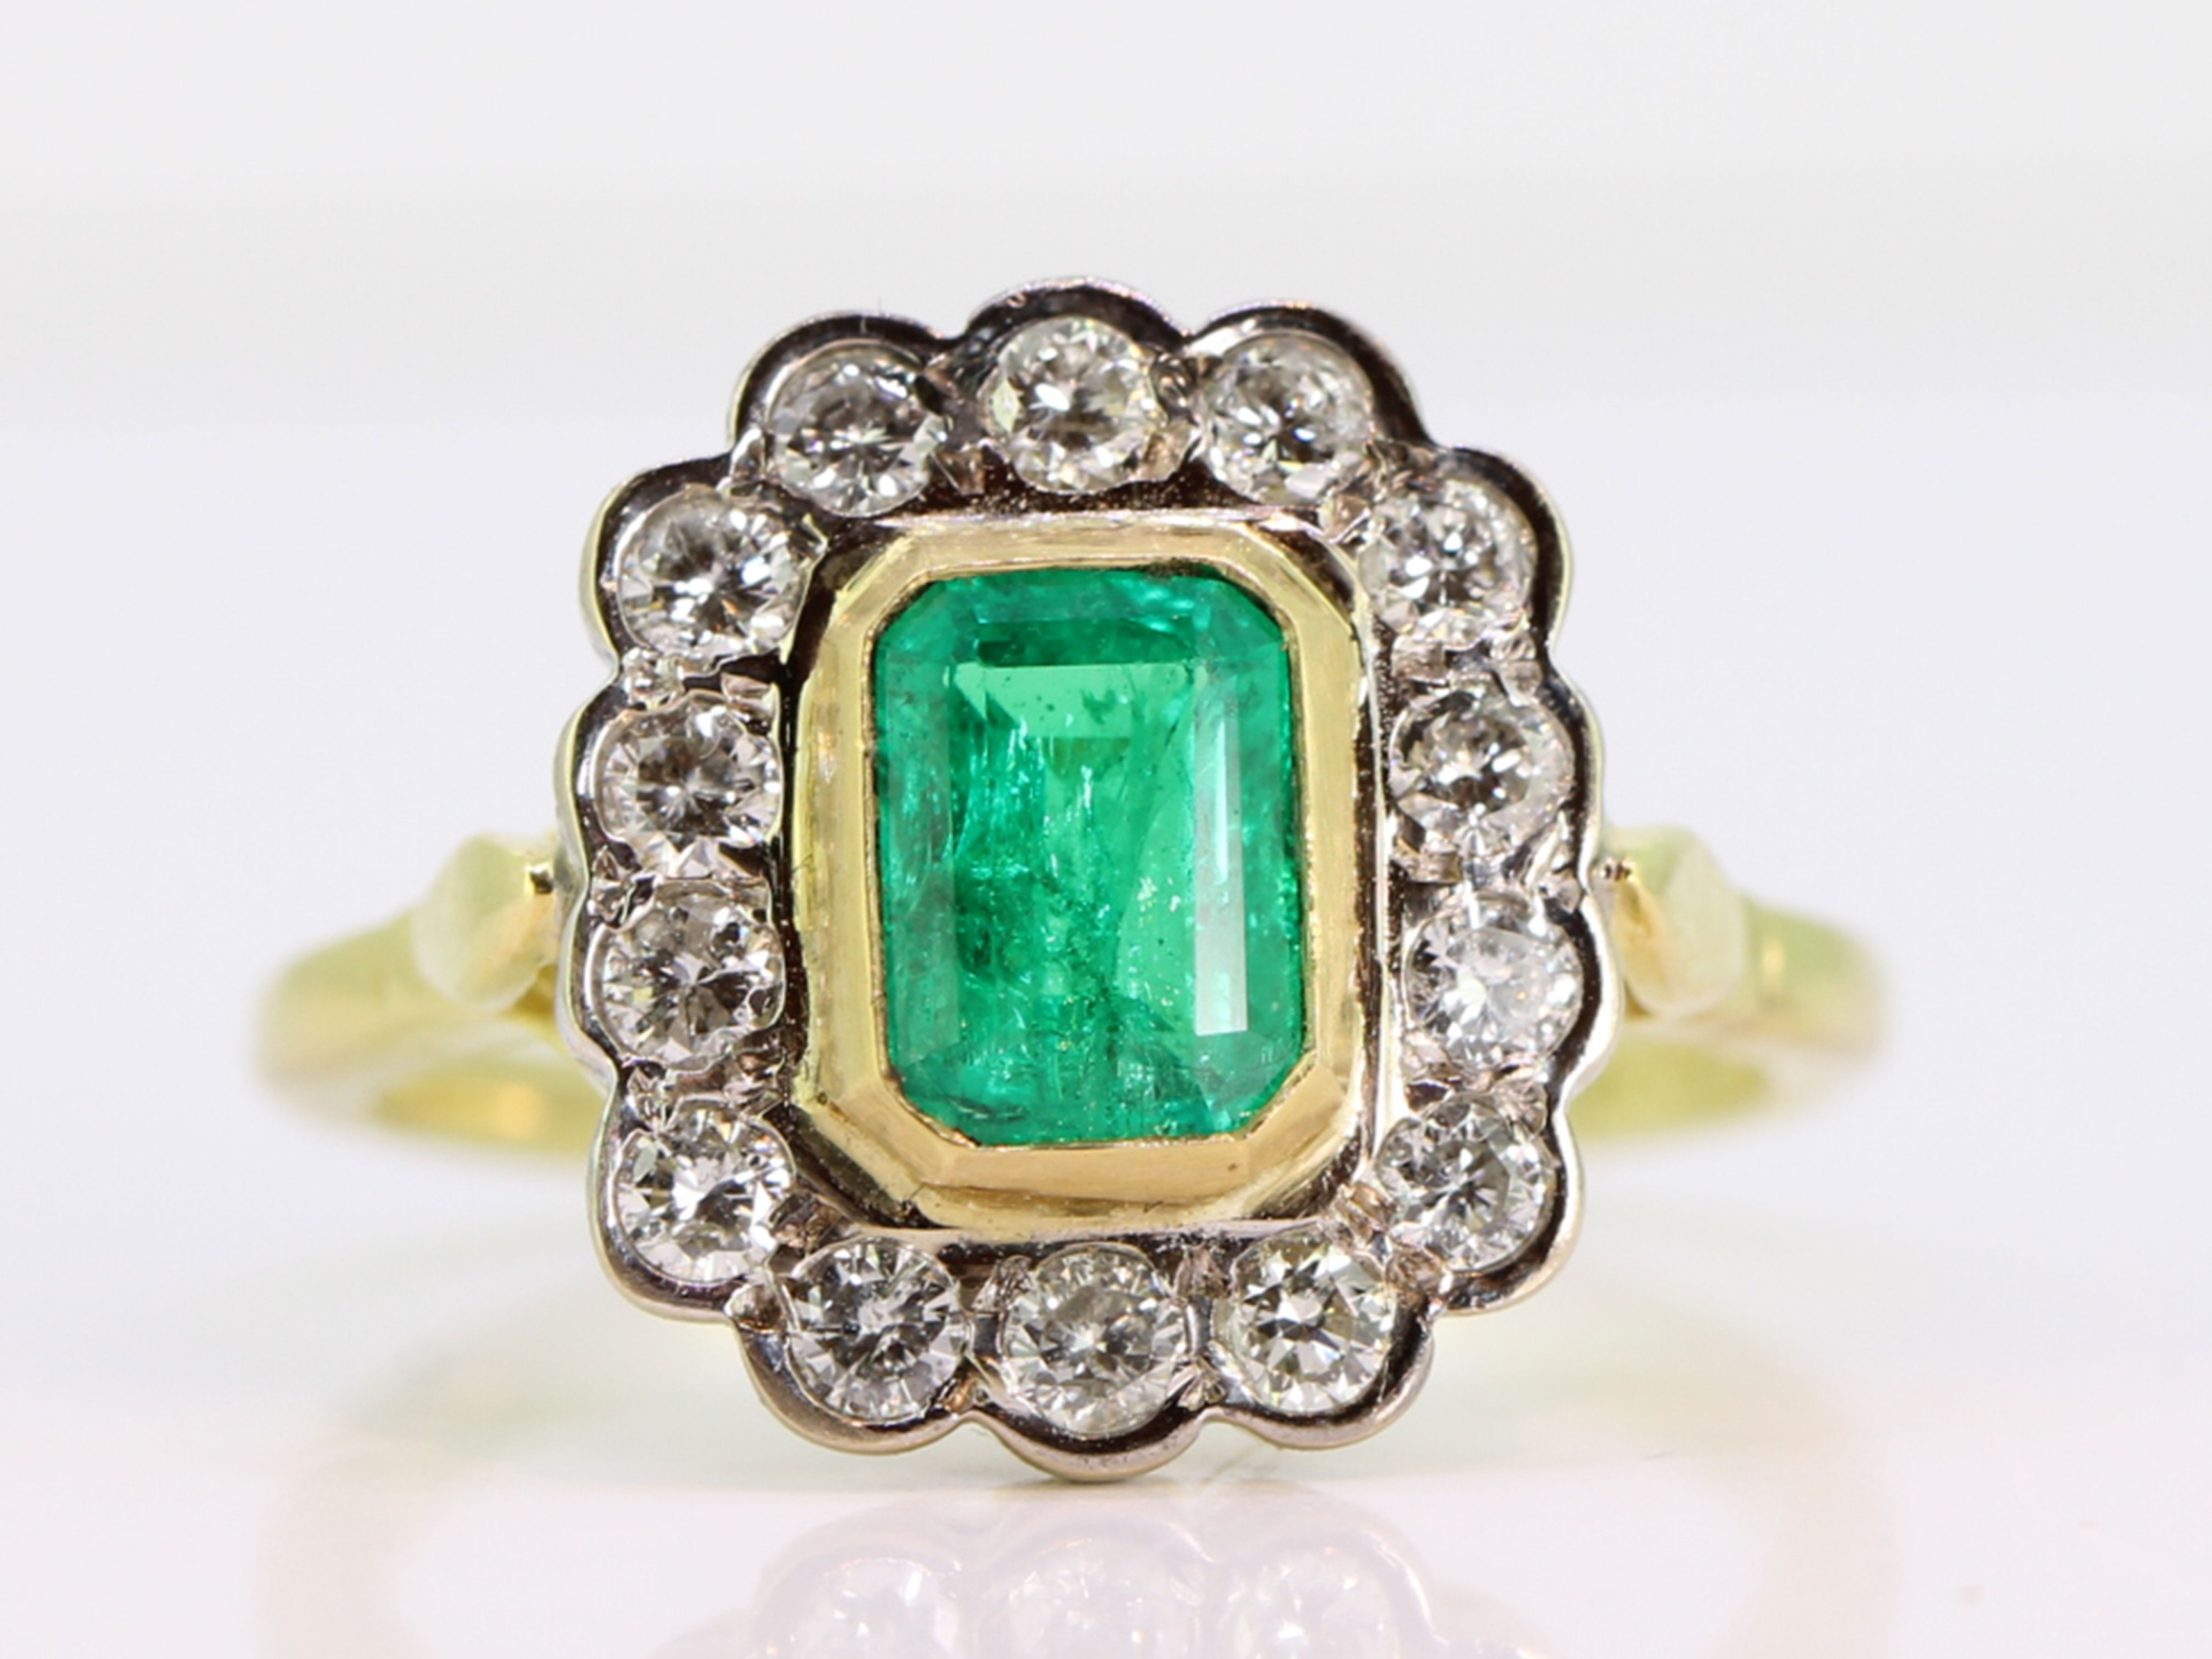 STUNNING COLOMBIAN EMERALD AND DIAMOND 18 CARAT GOLD CLUSTER RING